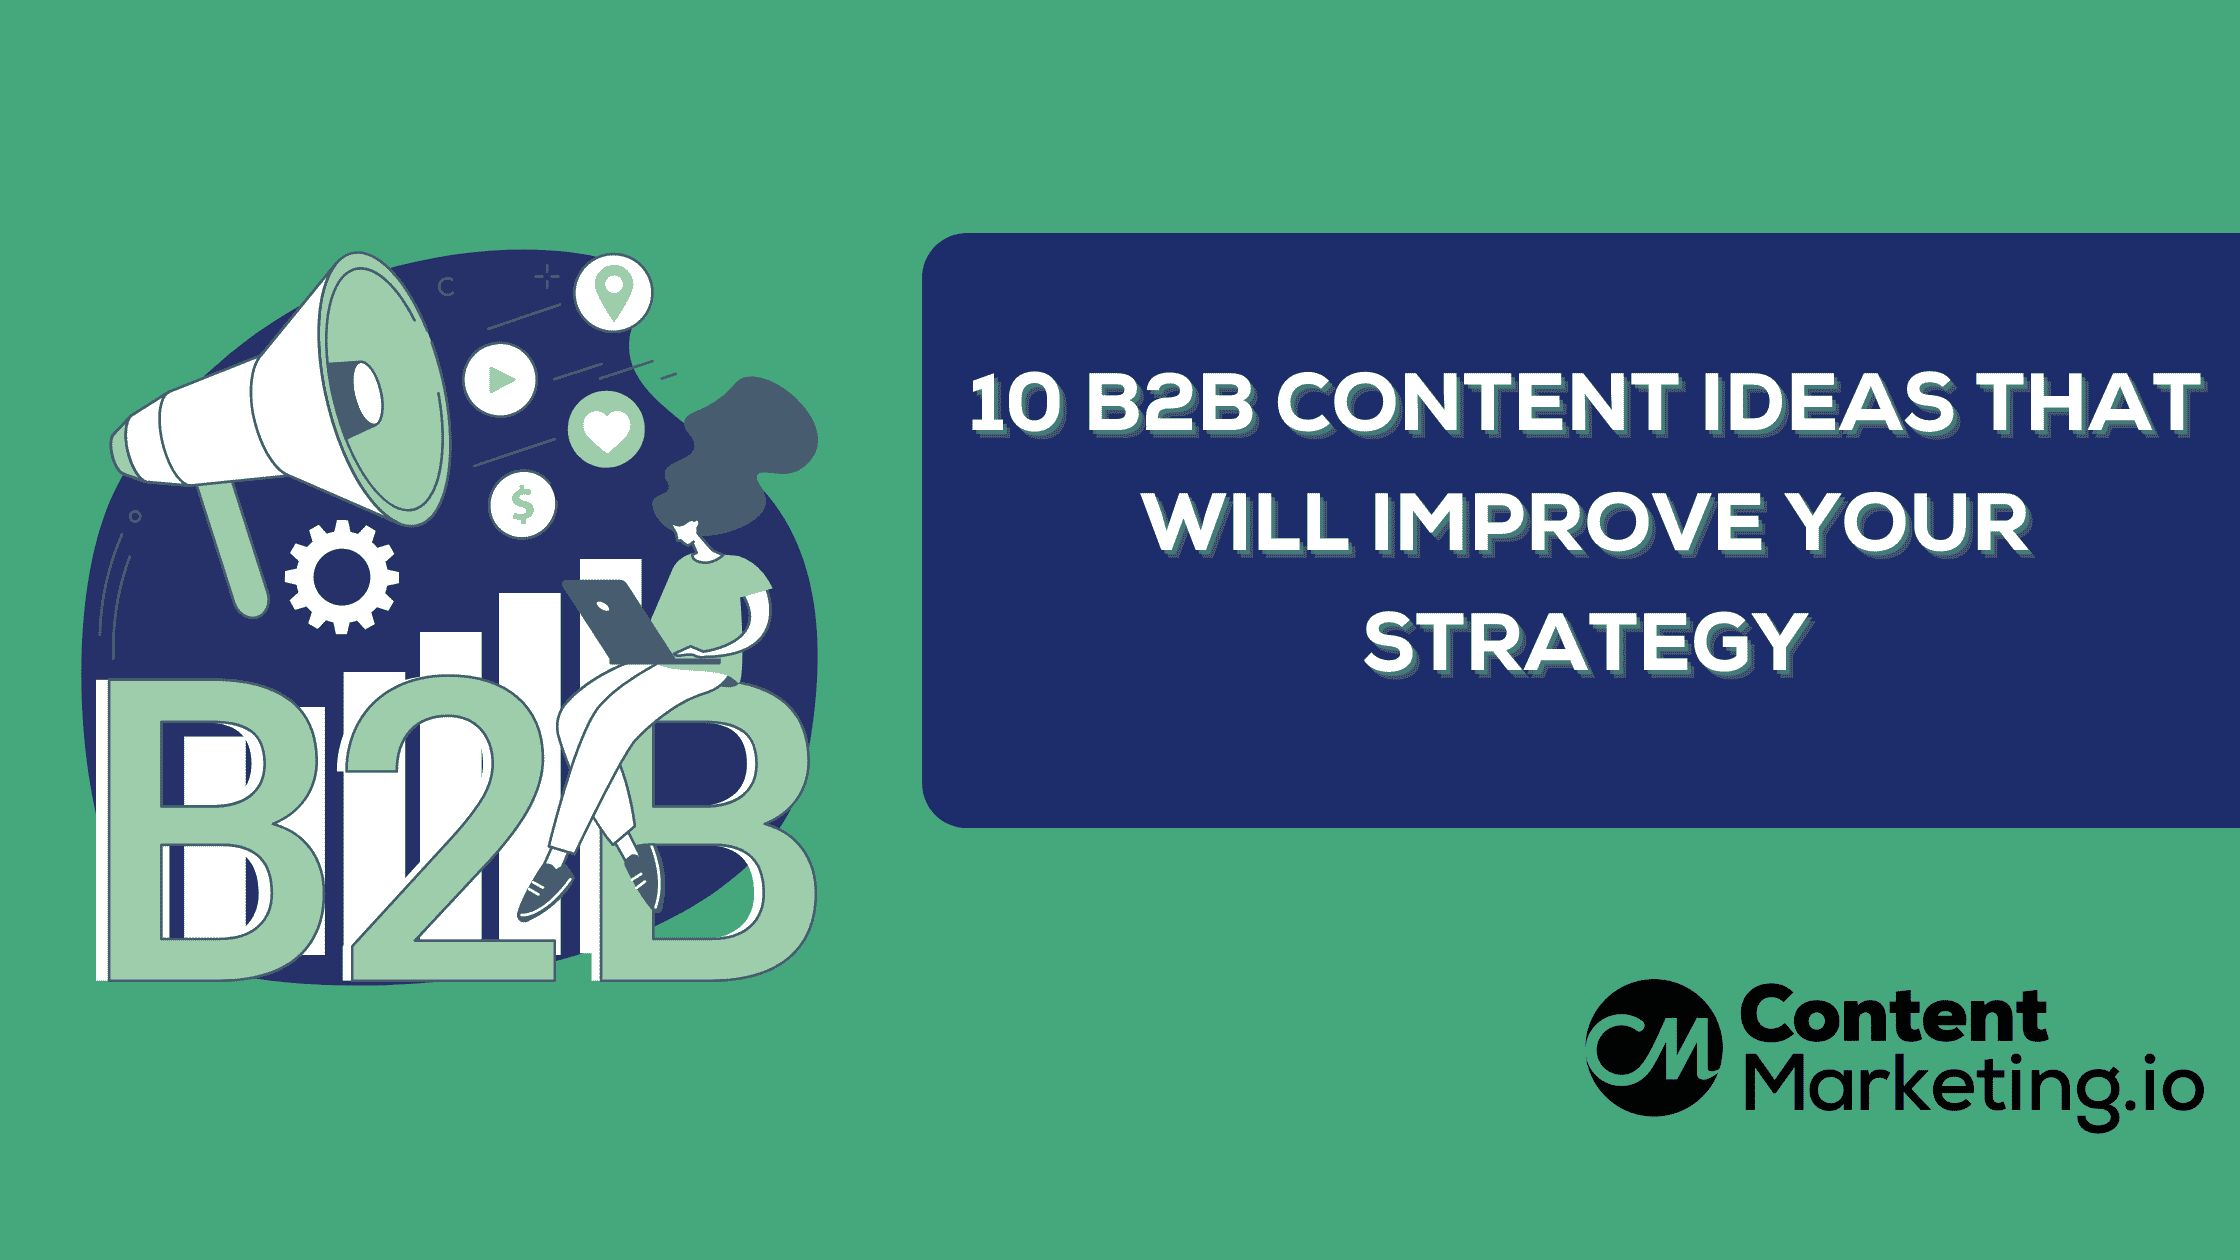 10 B2B Content Ideas that Will Improve Your Strategy